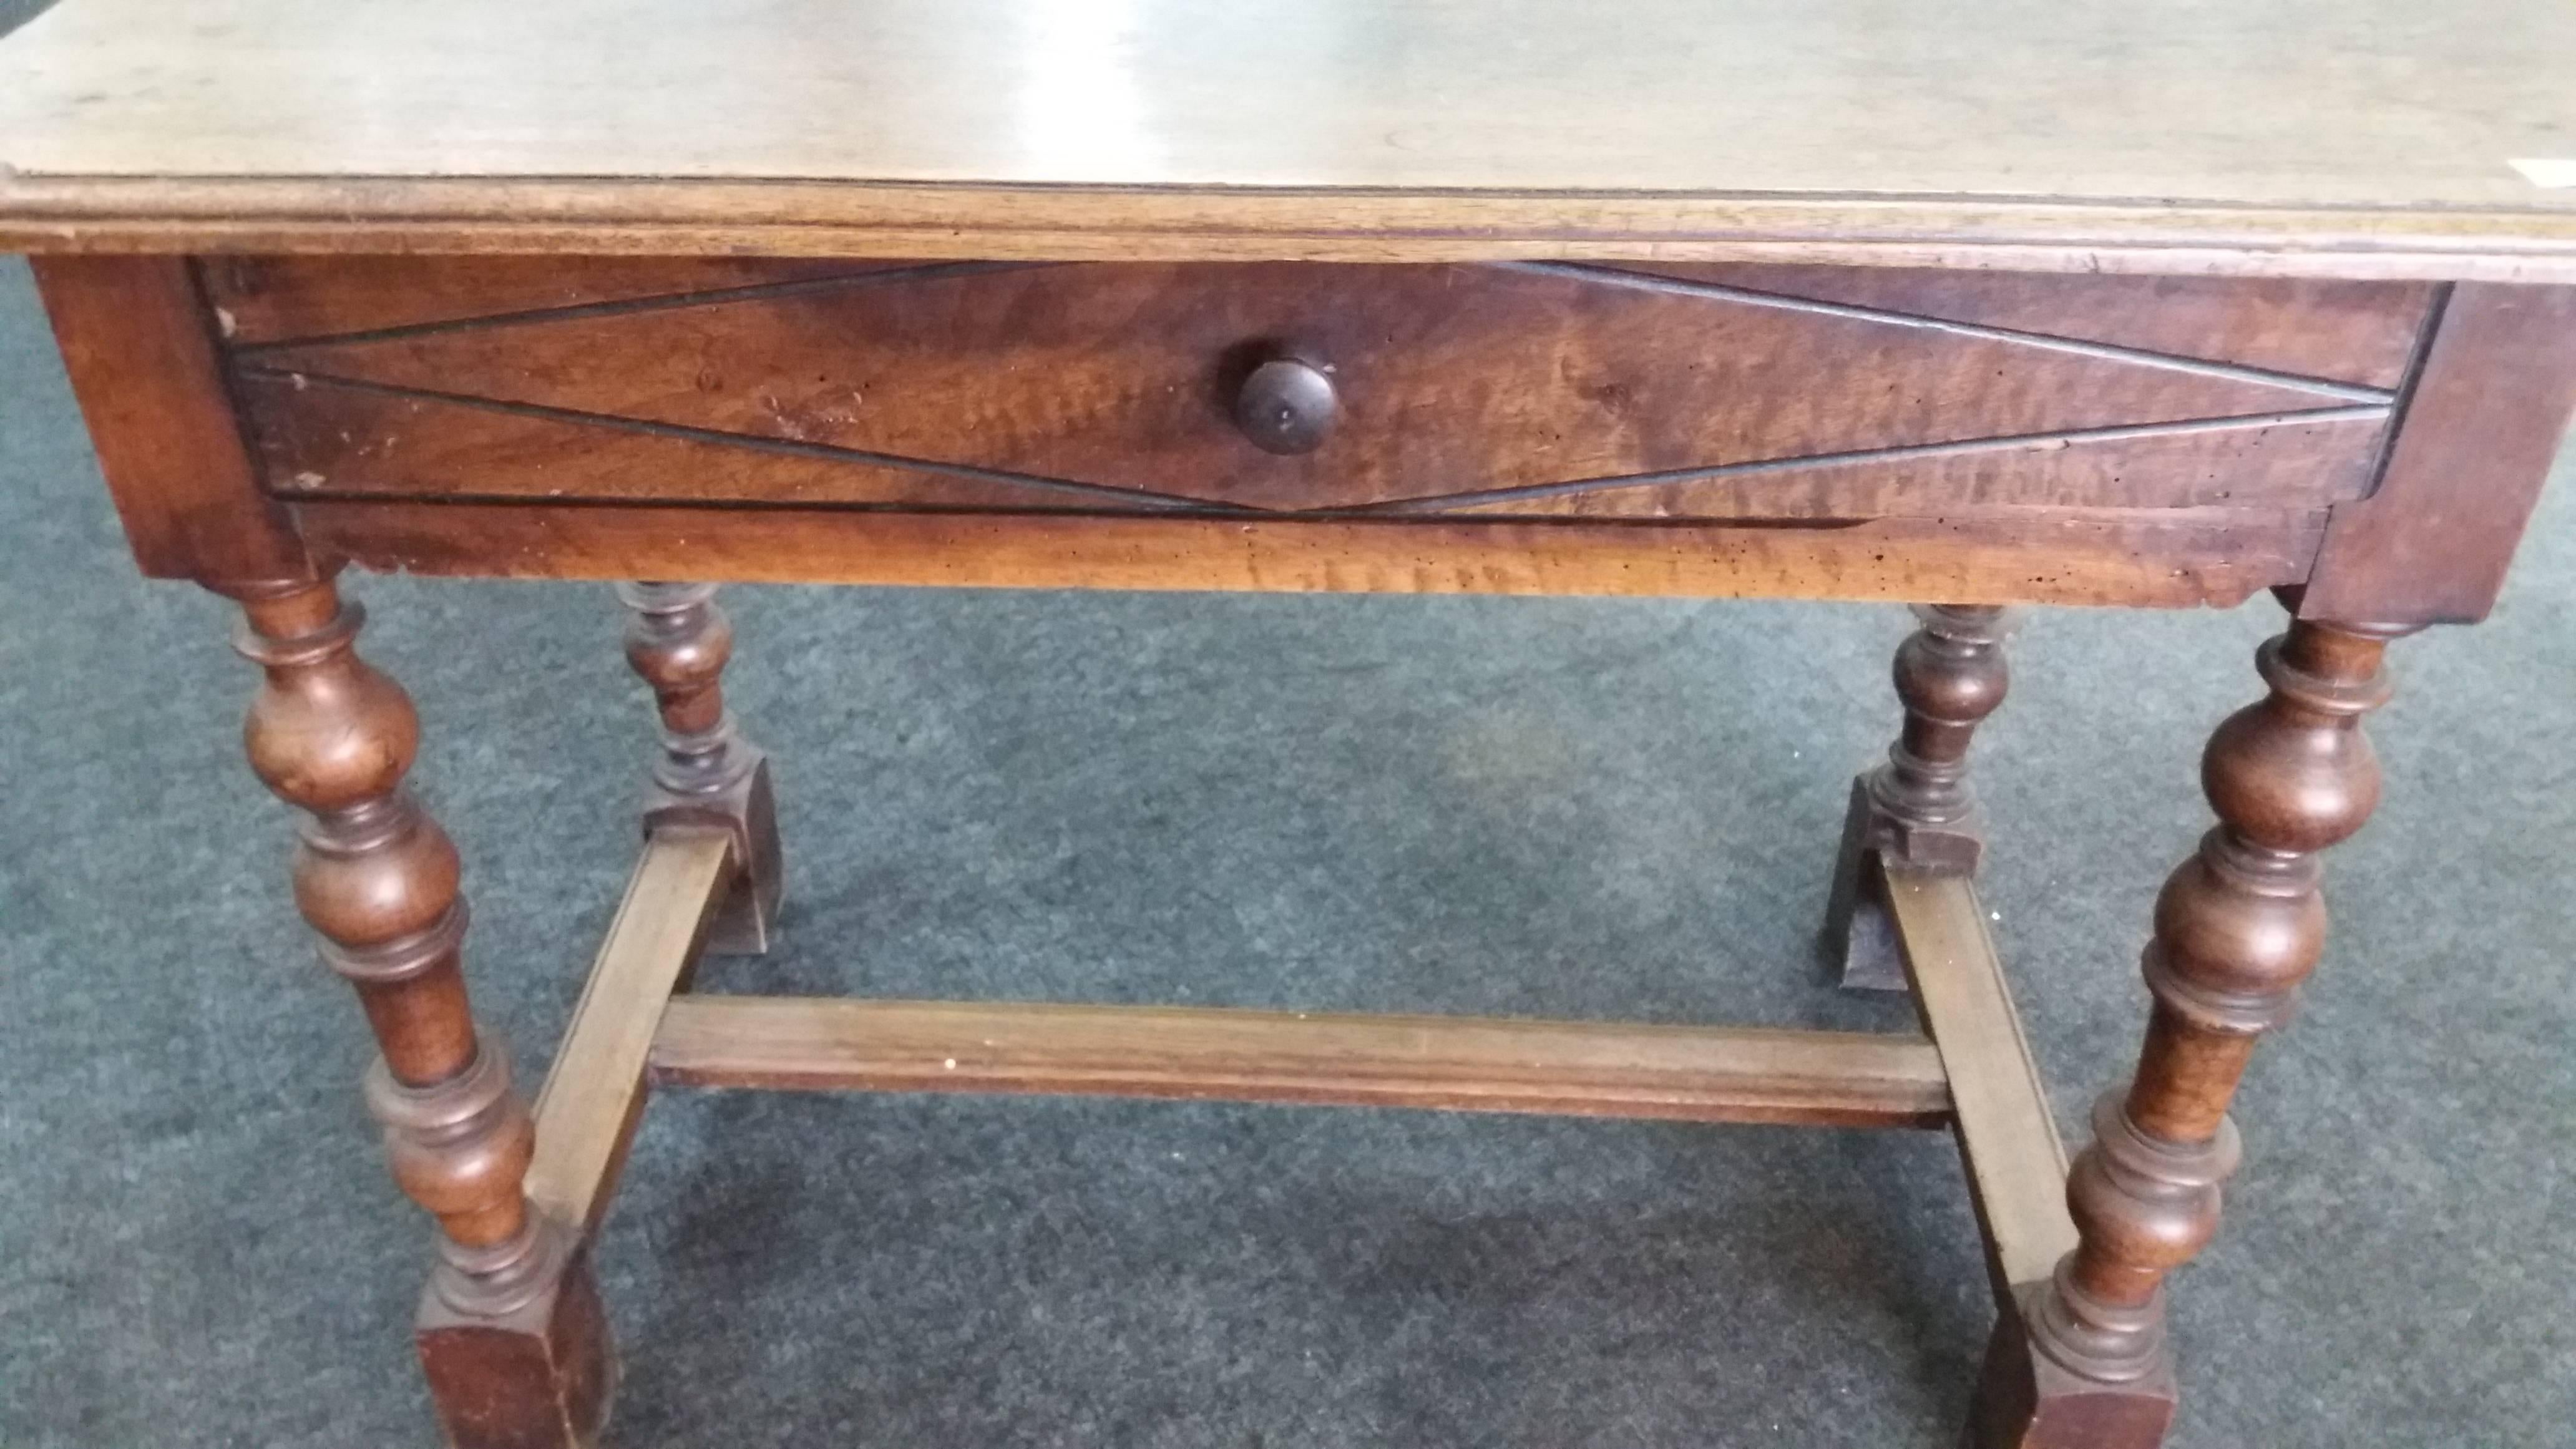 This desk has a drawer. It is made of walnut wood. It is French, 18 century. It has to be restored.